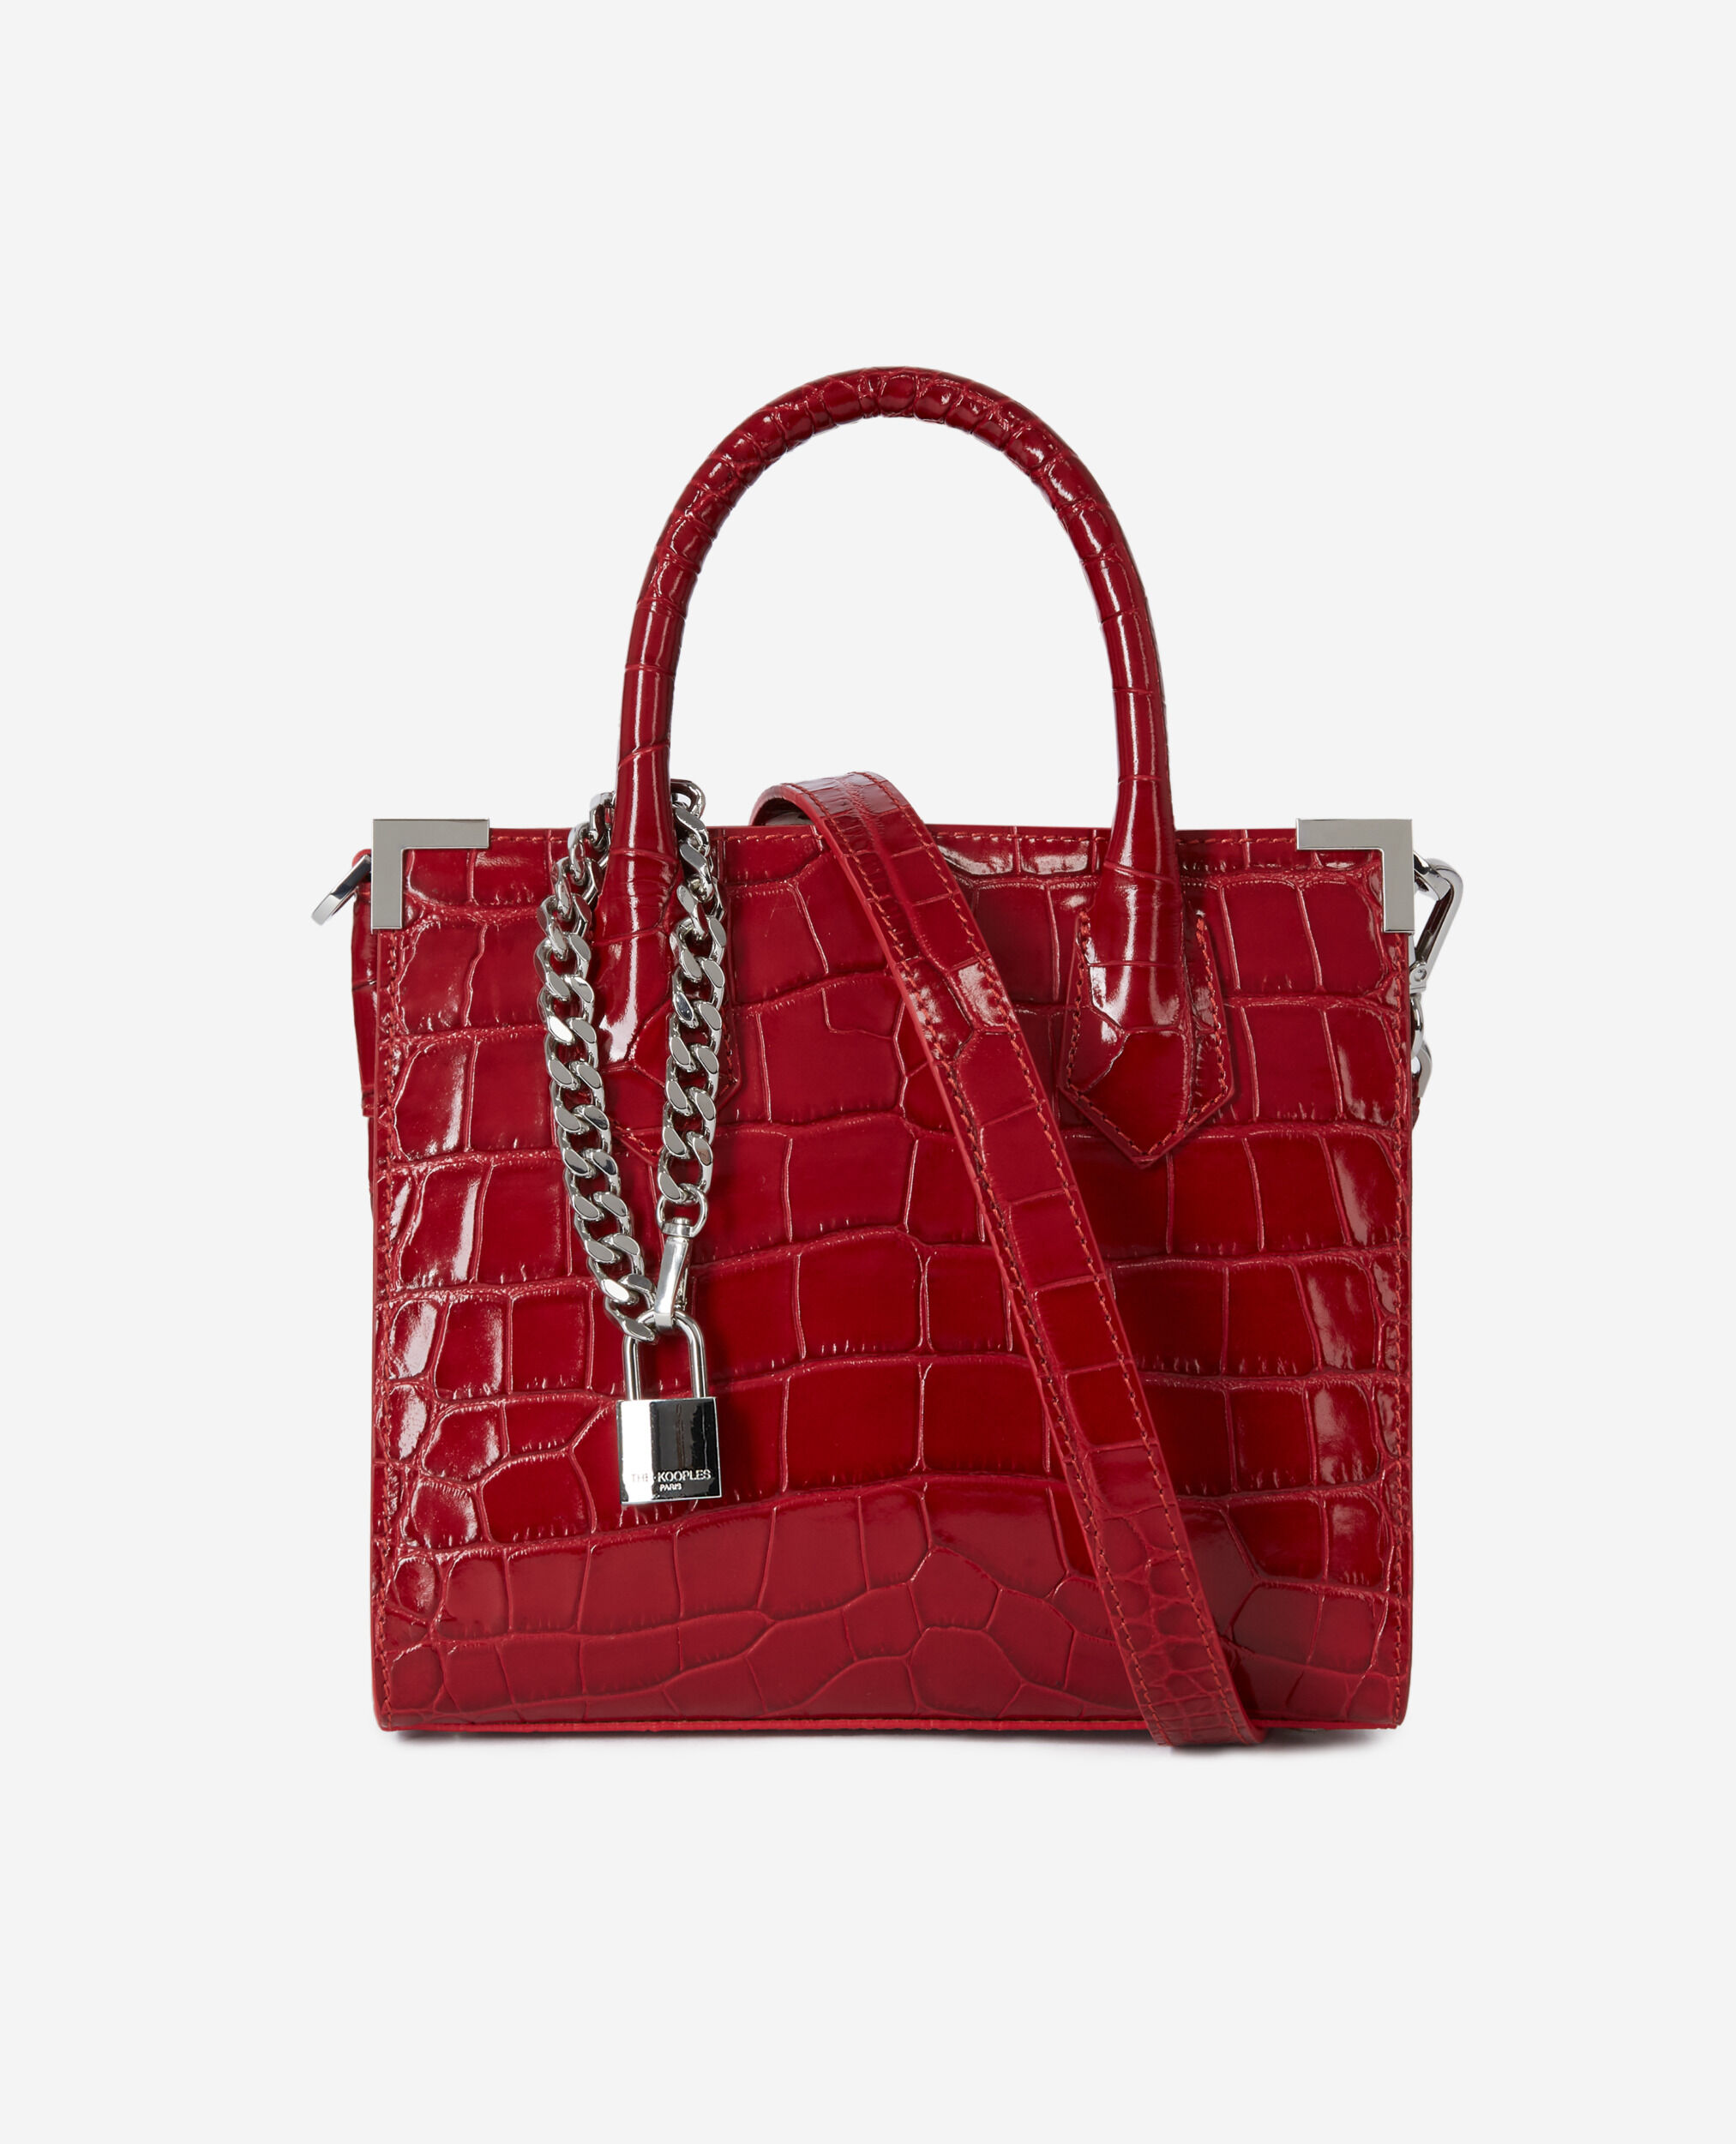 Medium Ming bag in red leather, RED RISK, hi-res image number null